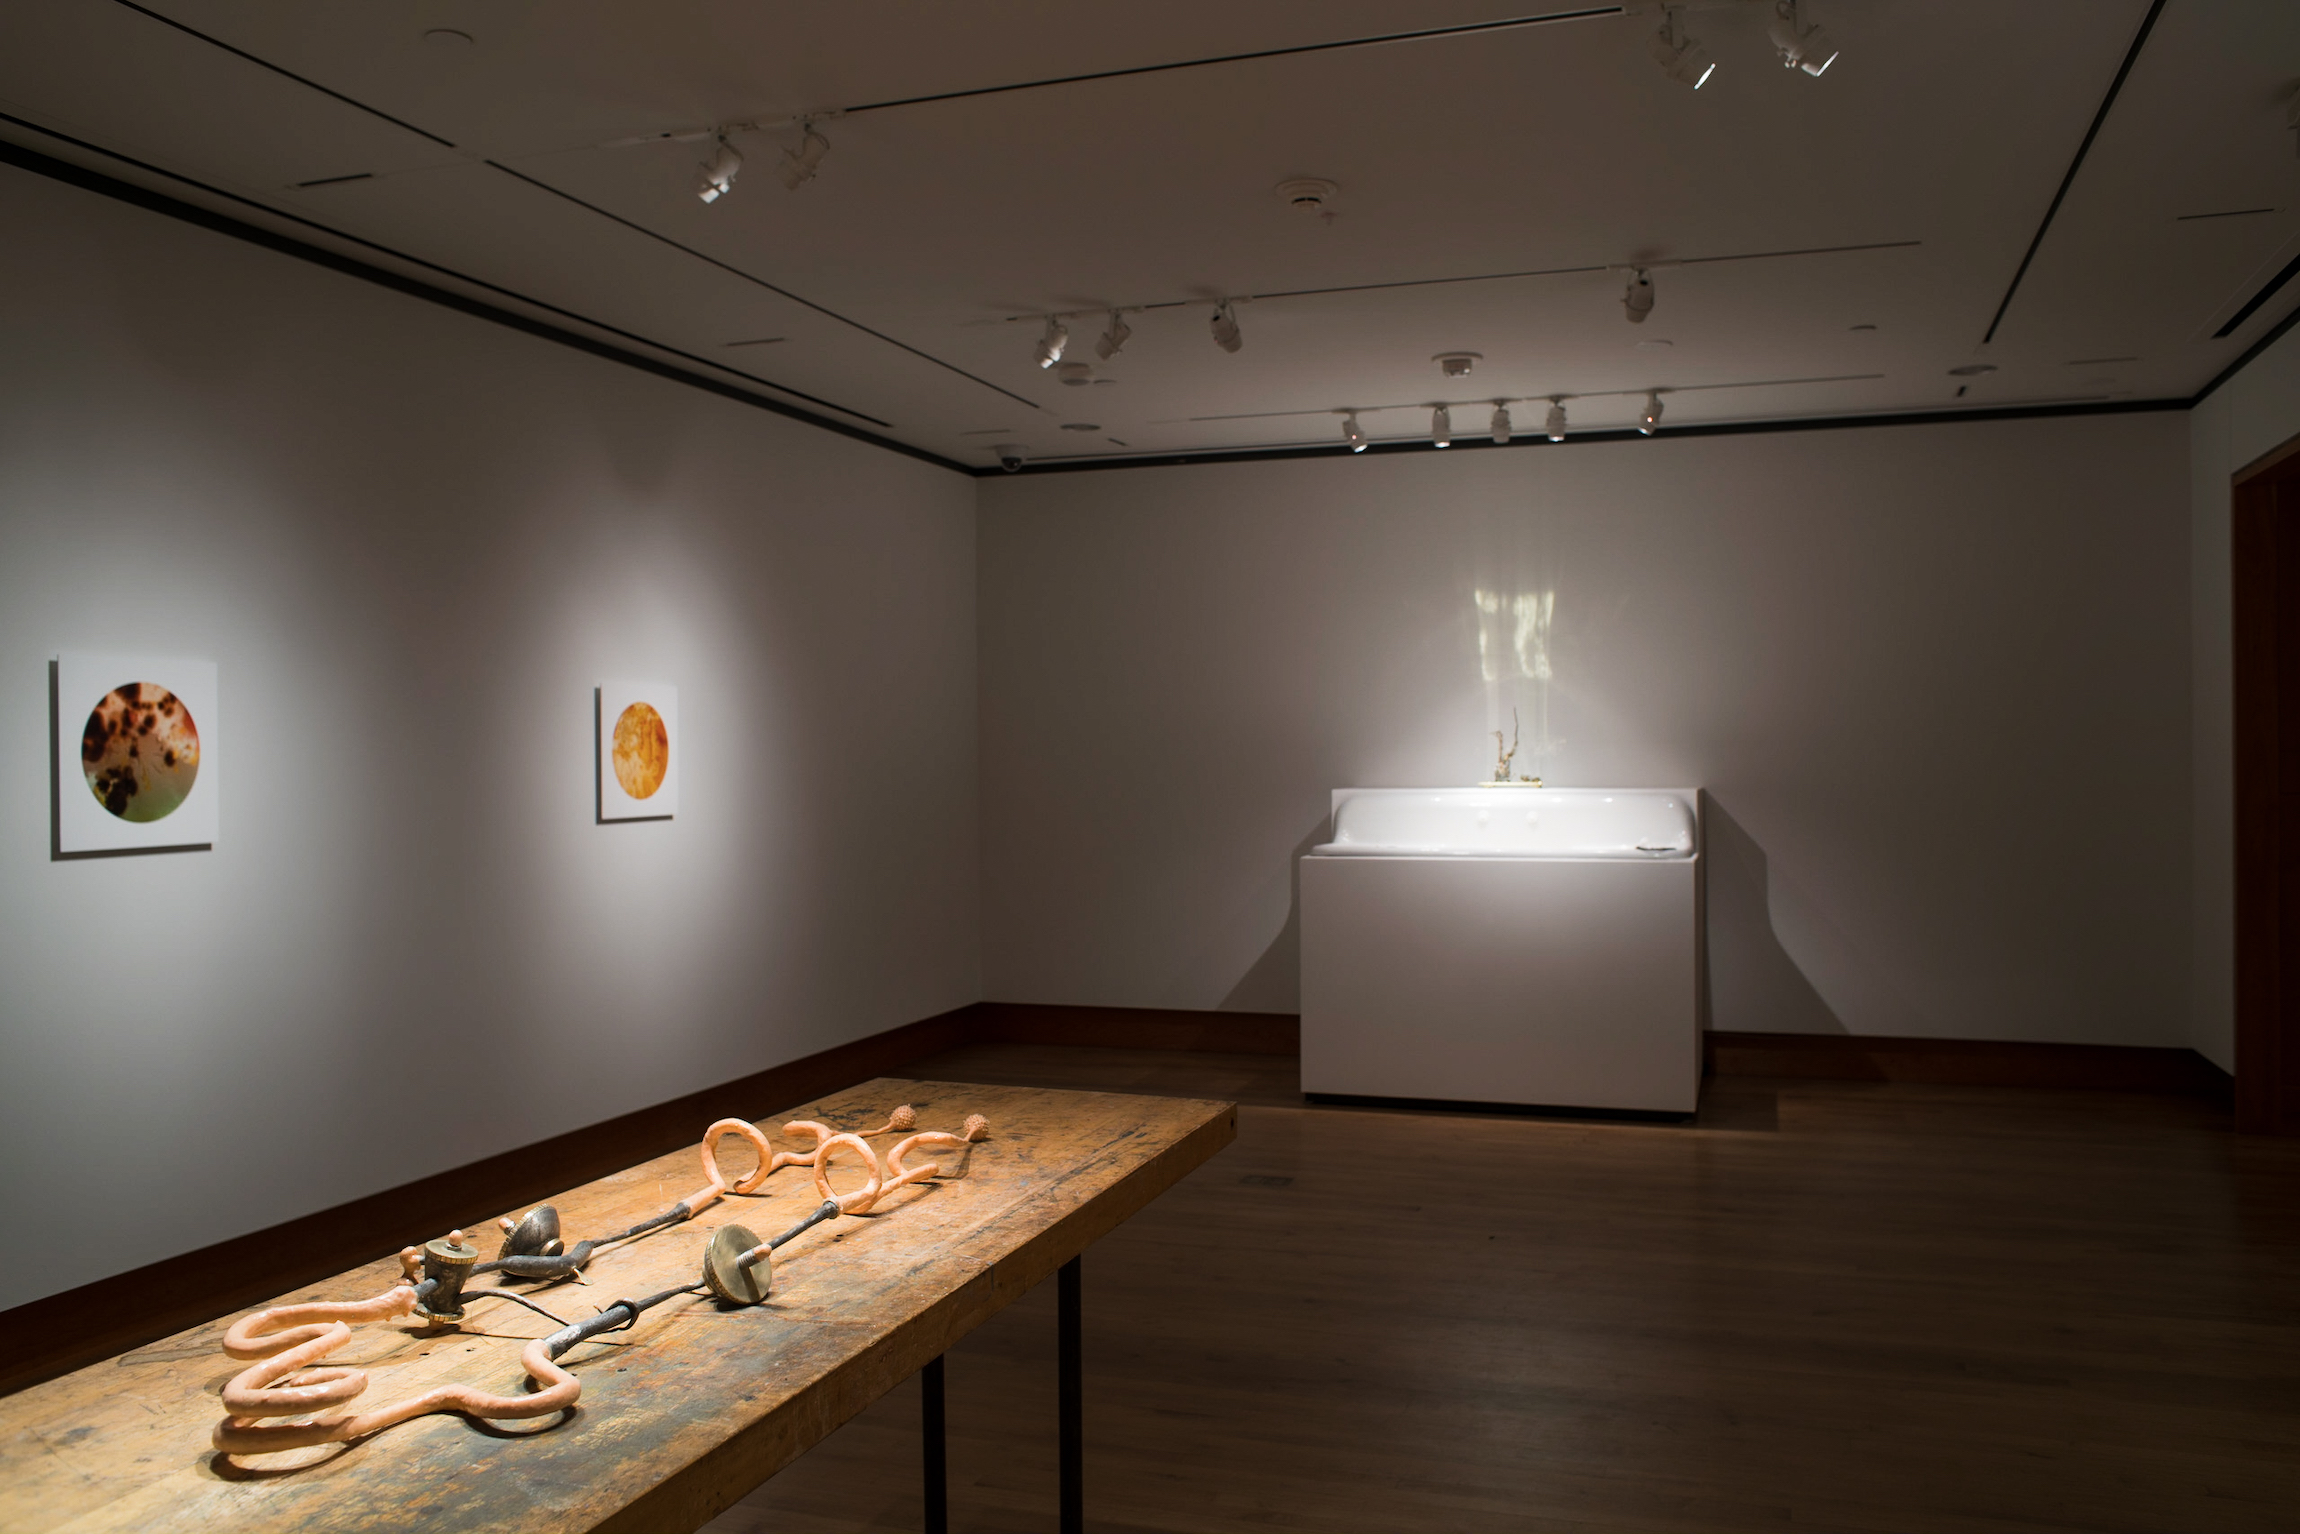 Installation view of Chloe Darke's Master of Fine Arts exhibition Secrete, Augment, Testify at the Chazen Museum of Art, University of Wisconsin-Madison. Photography by Kyle Herrera.